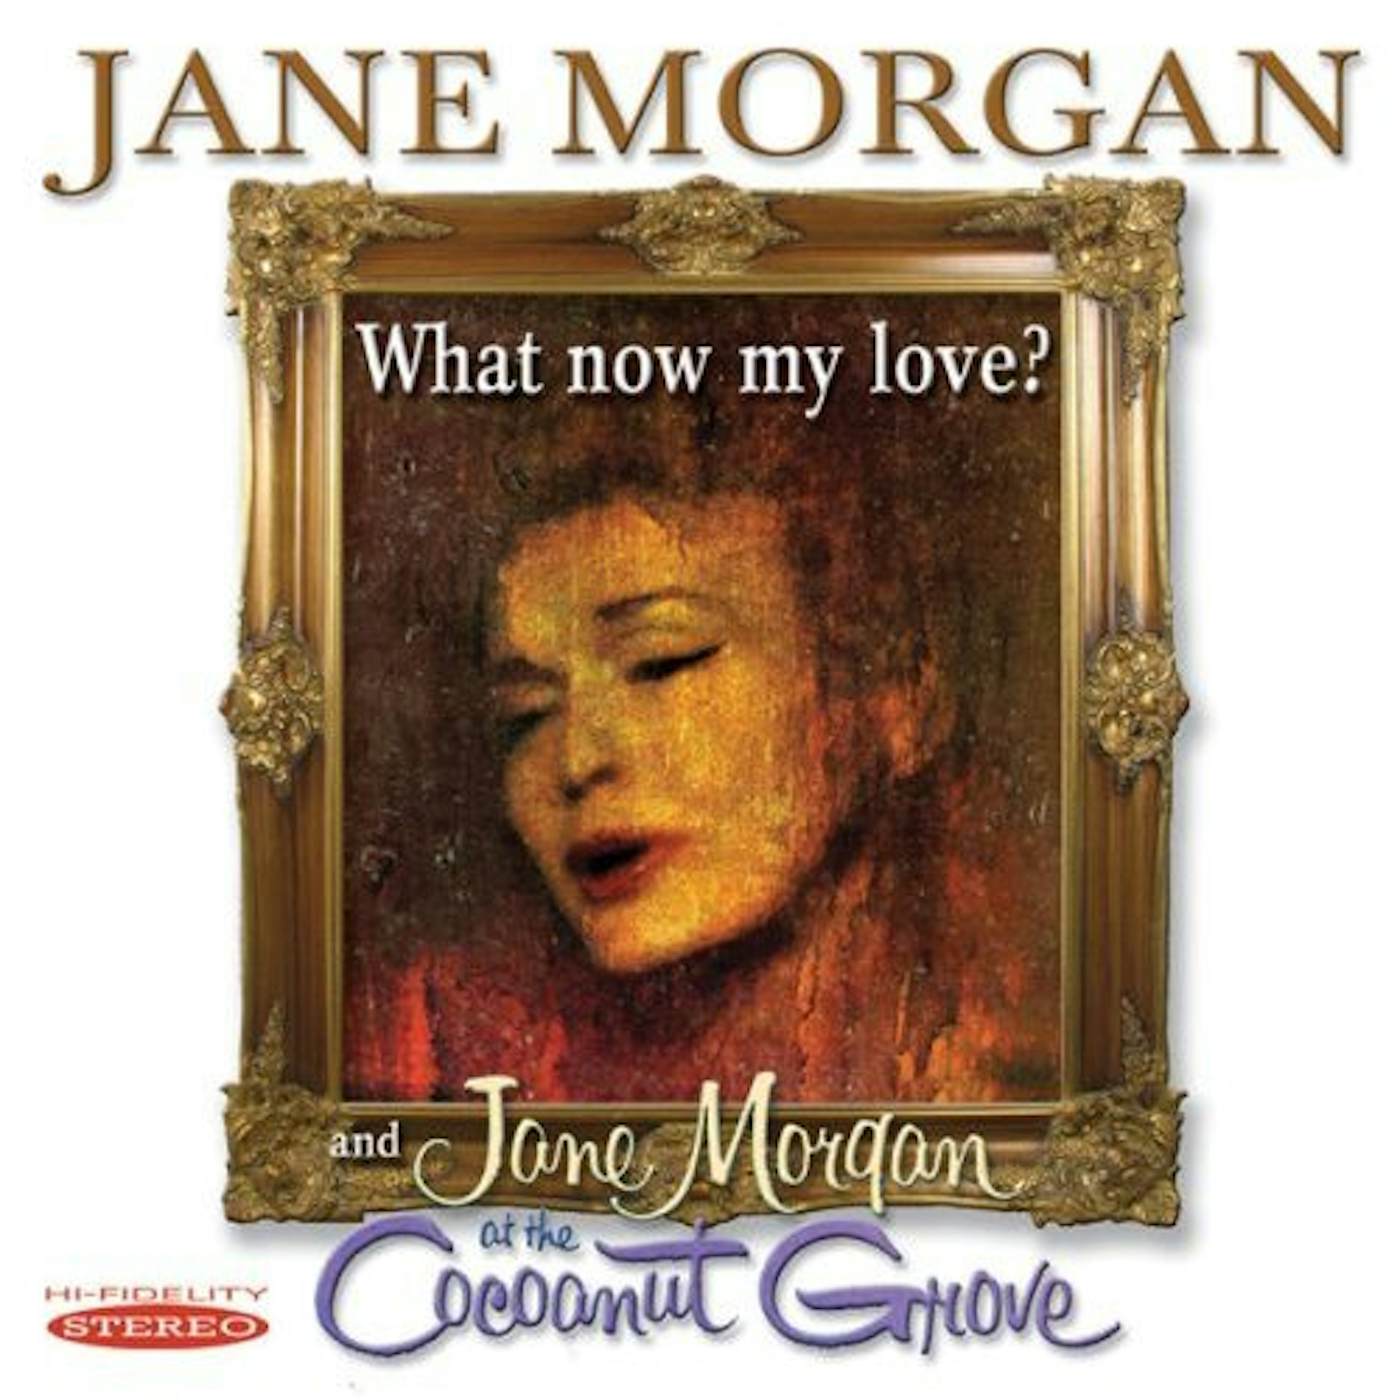 WHAT NOW MY LOVE & JANE MORGAN AT COCOANUT GROVE CD